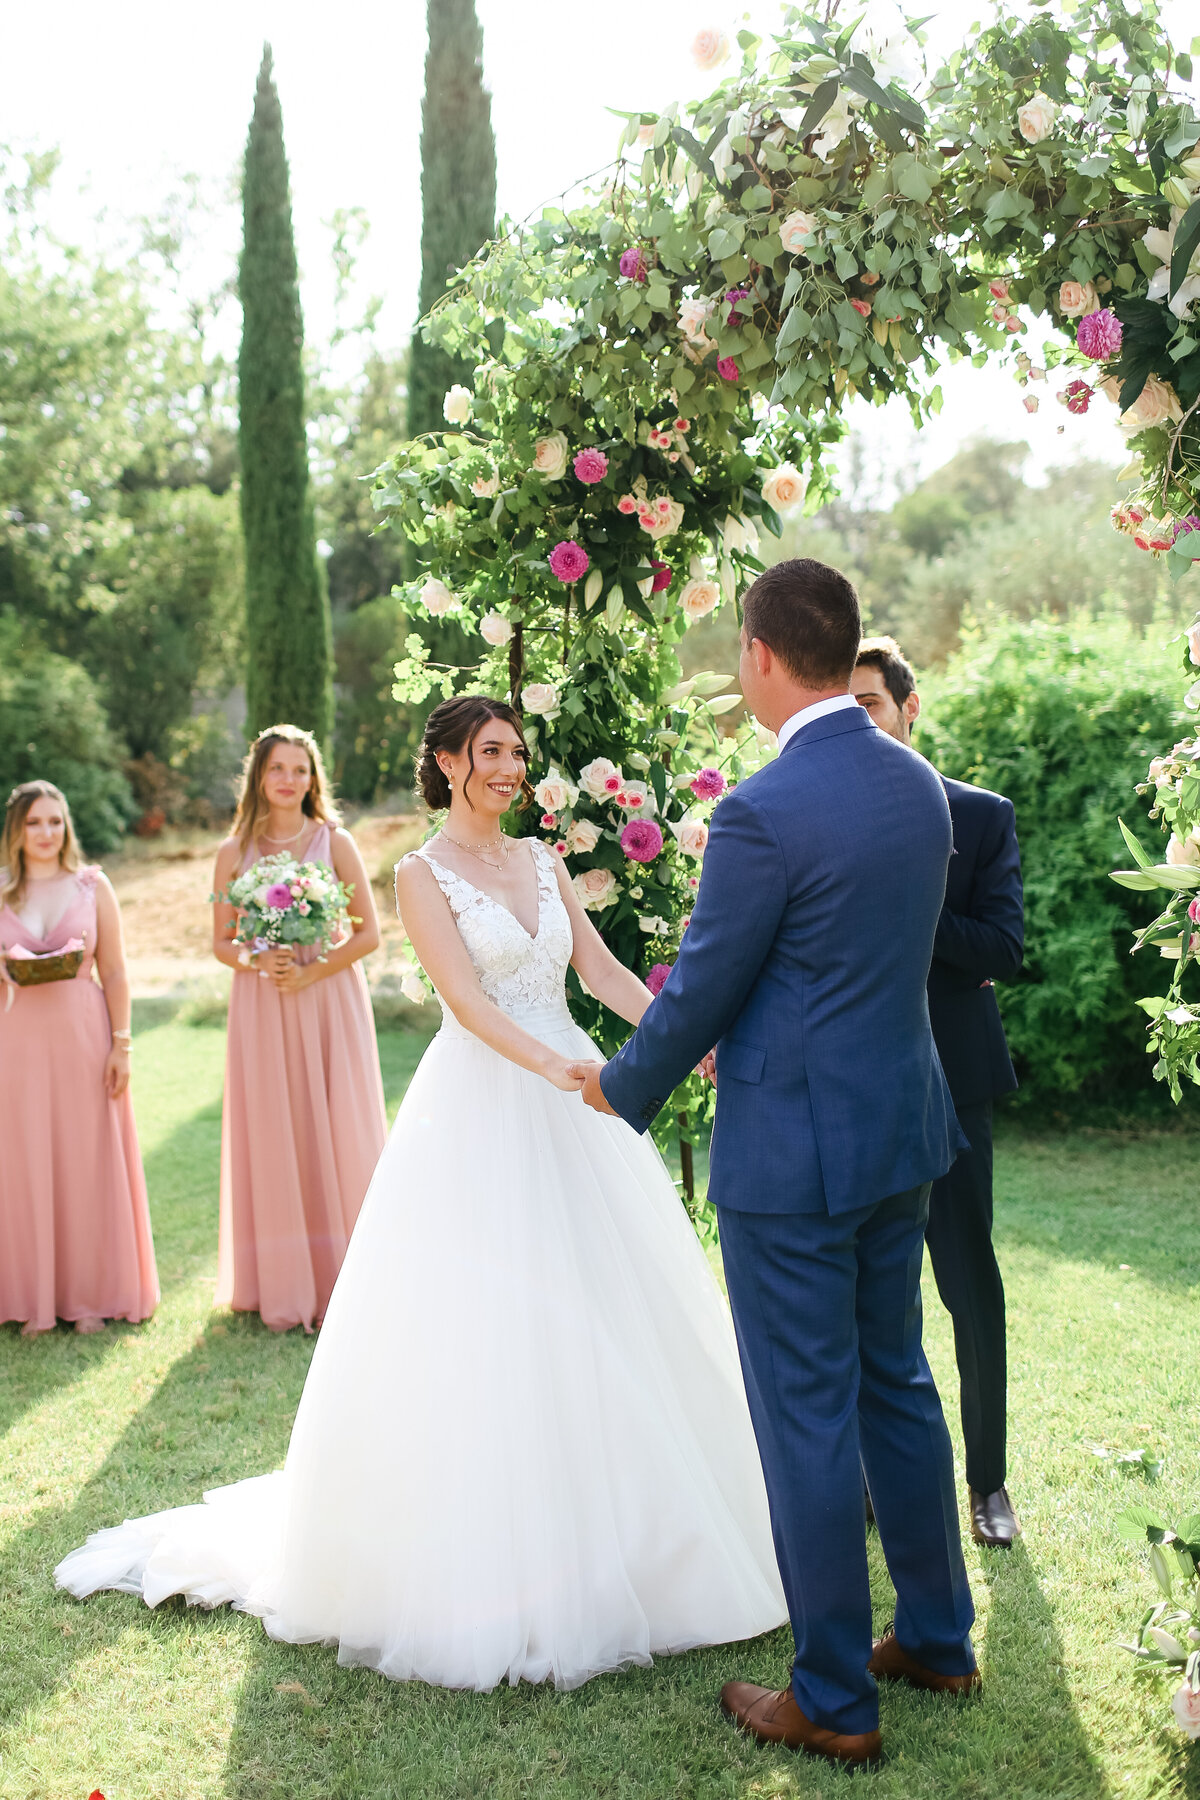 bride-and-groom-say-wedding-vows-at-luxury-wedding-in-south-of-france